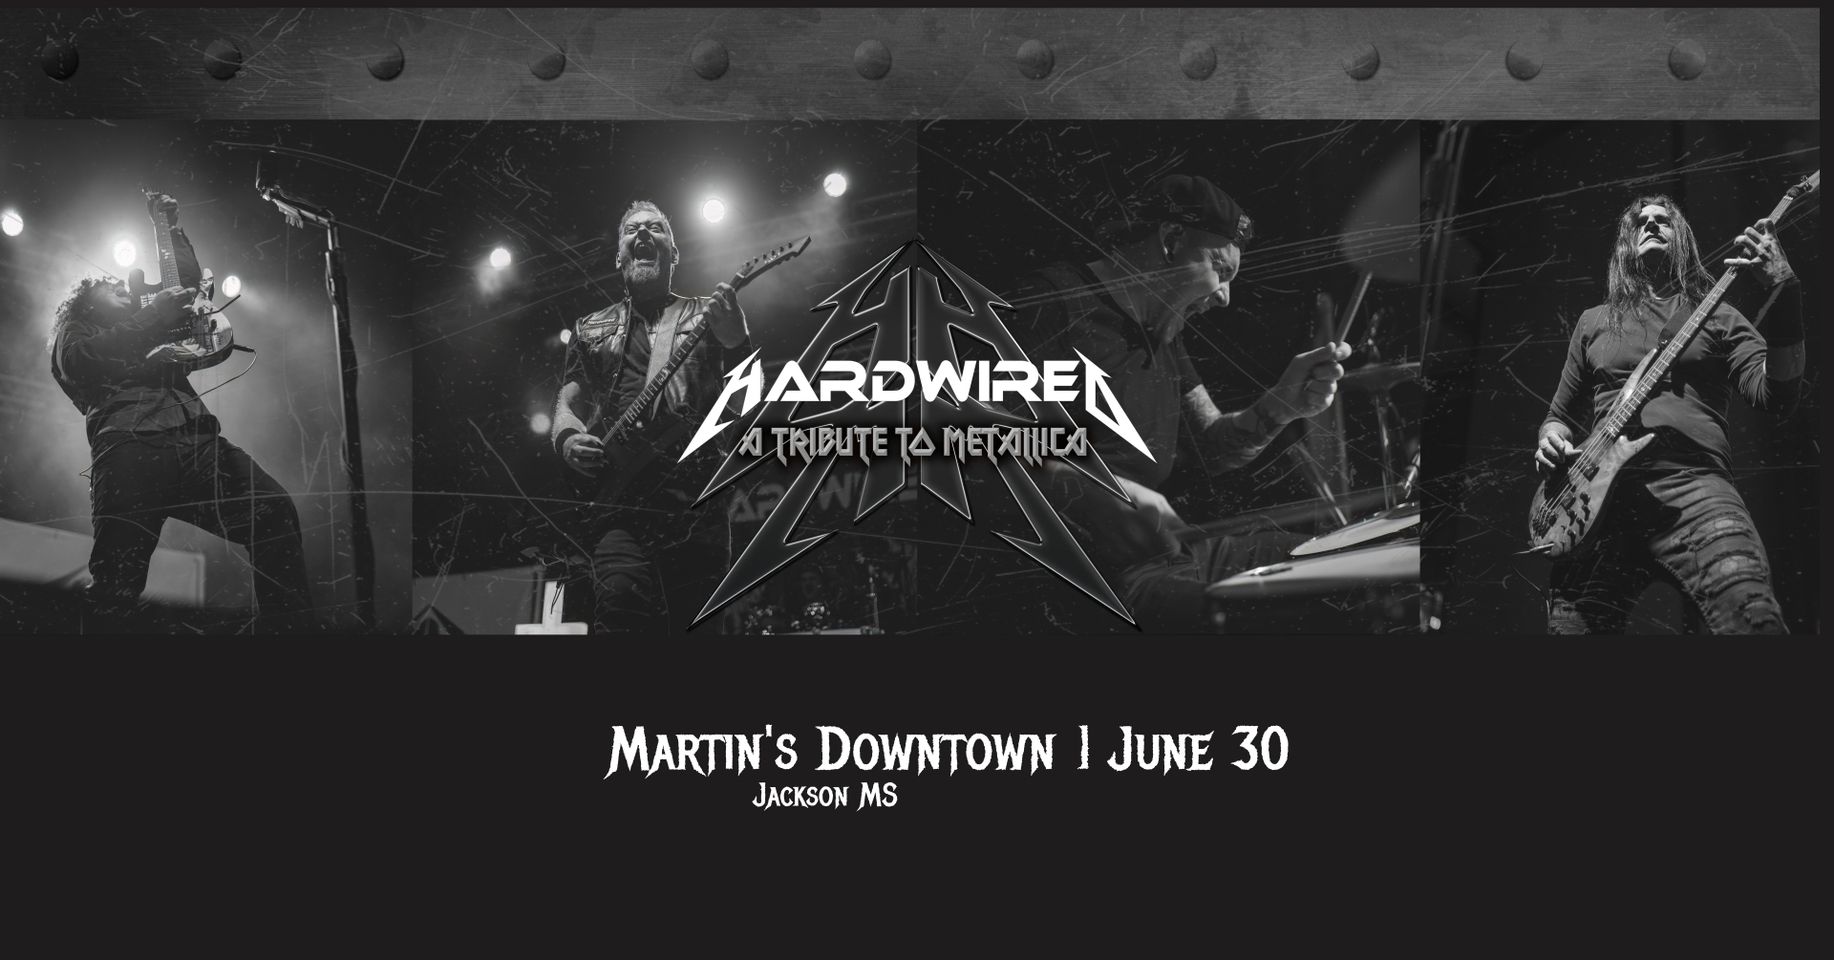 Hardwired – The Metallica Tribute at Martin’s Downtown